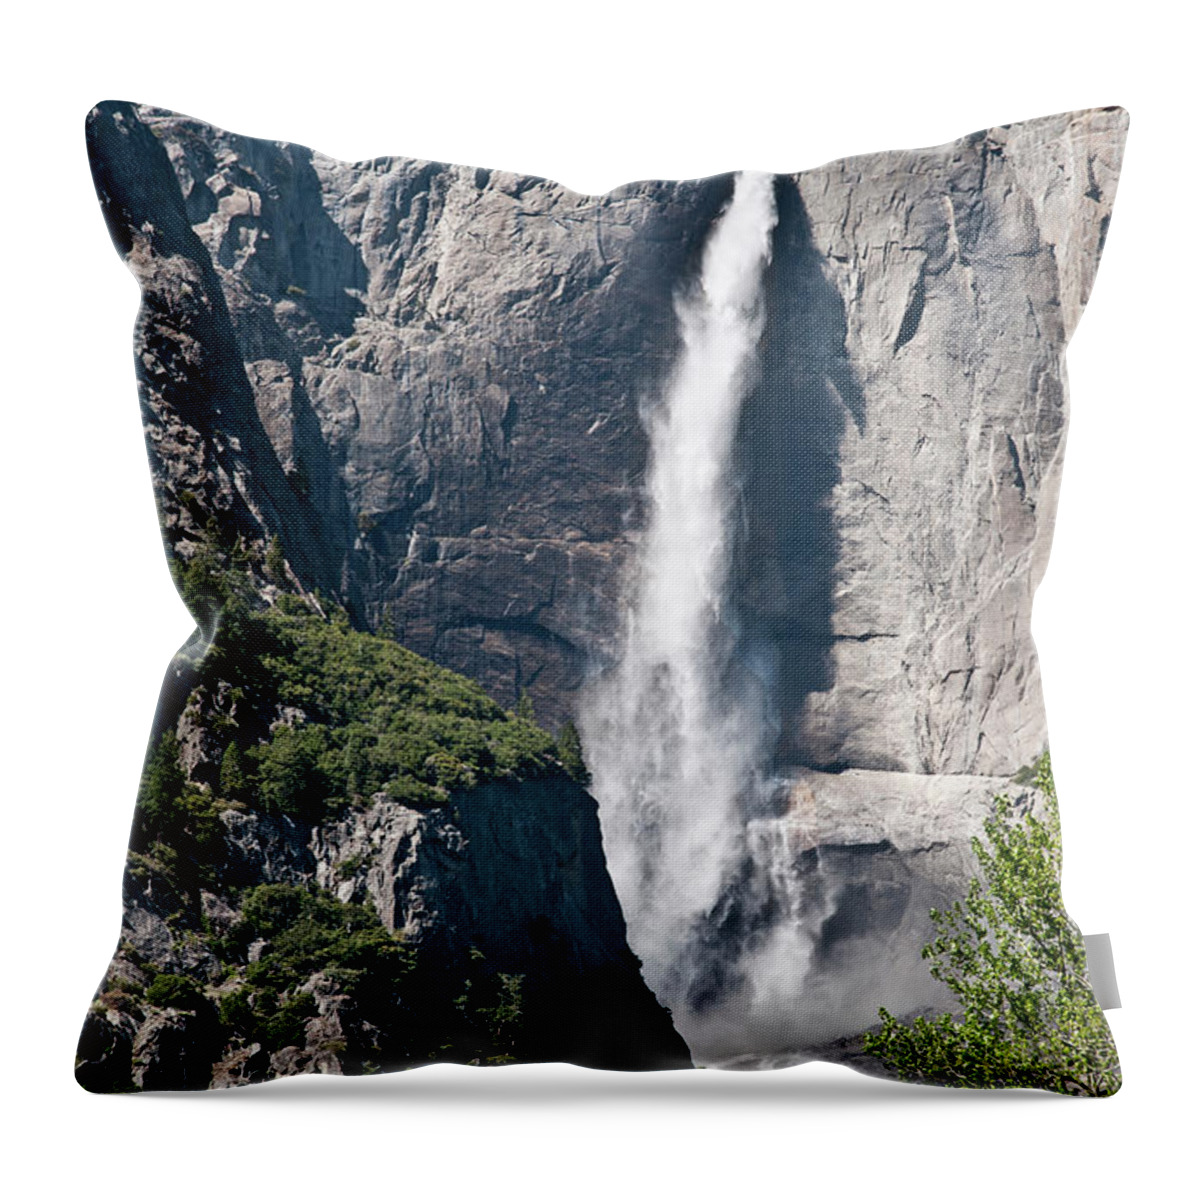 Scenics Throw Pillow featuring the photograph Yosemite Falls, Yosemite National Park by Alan W Cole